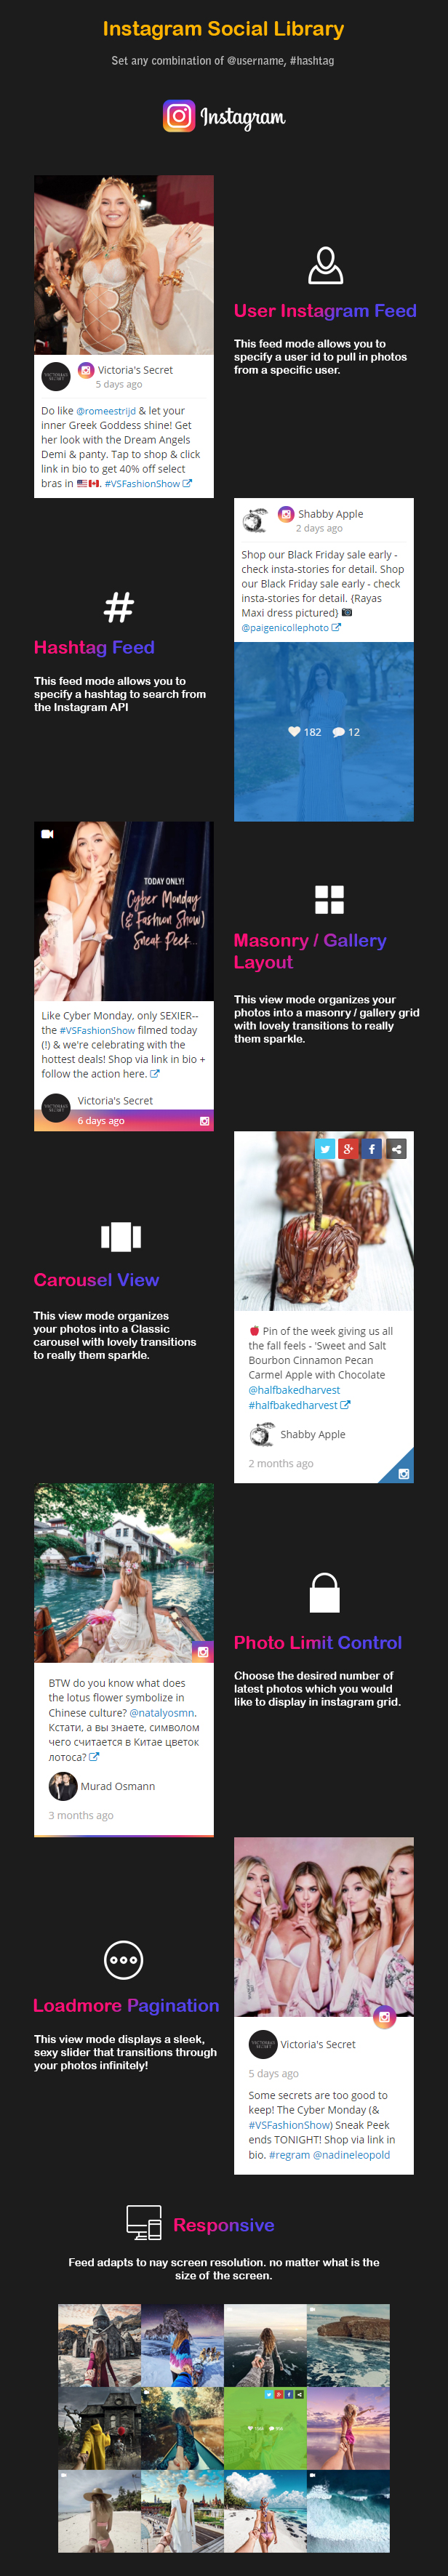 Visual Composer - Instagram Social Stream Grid With Carousel